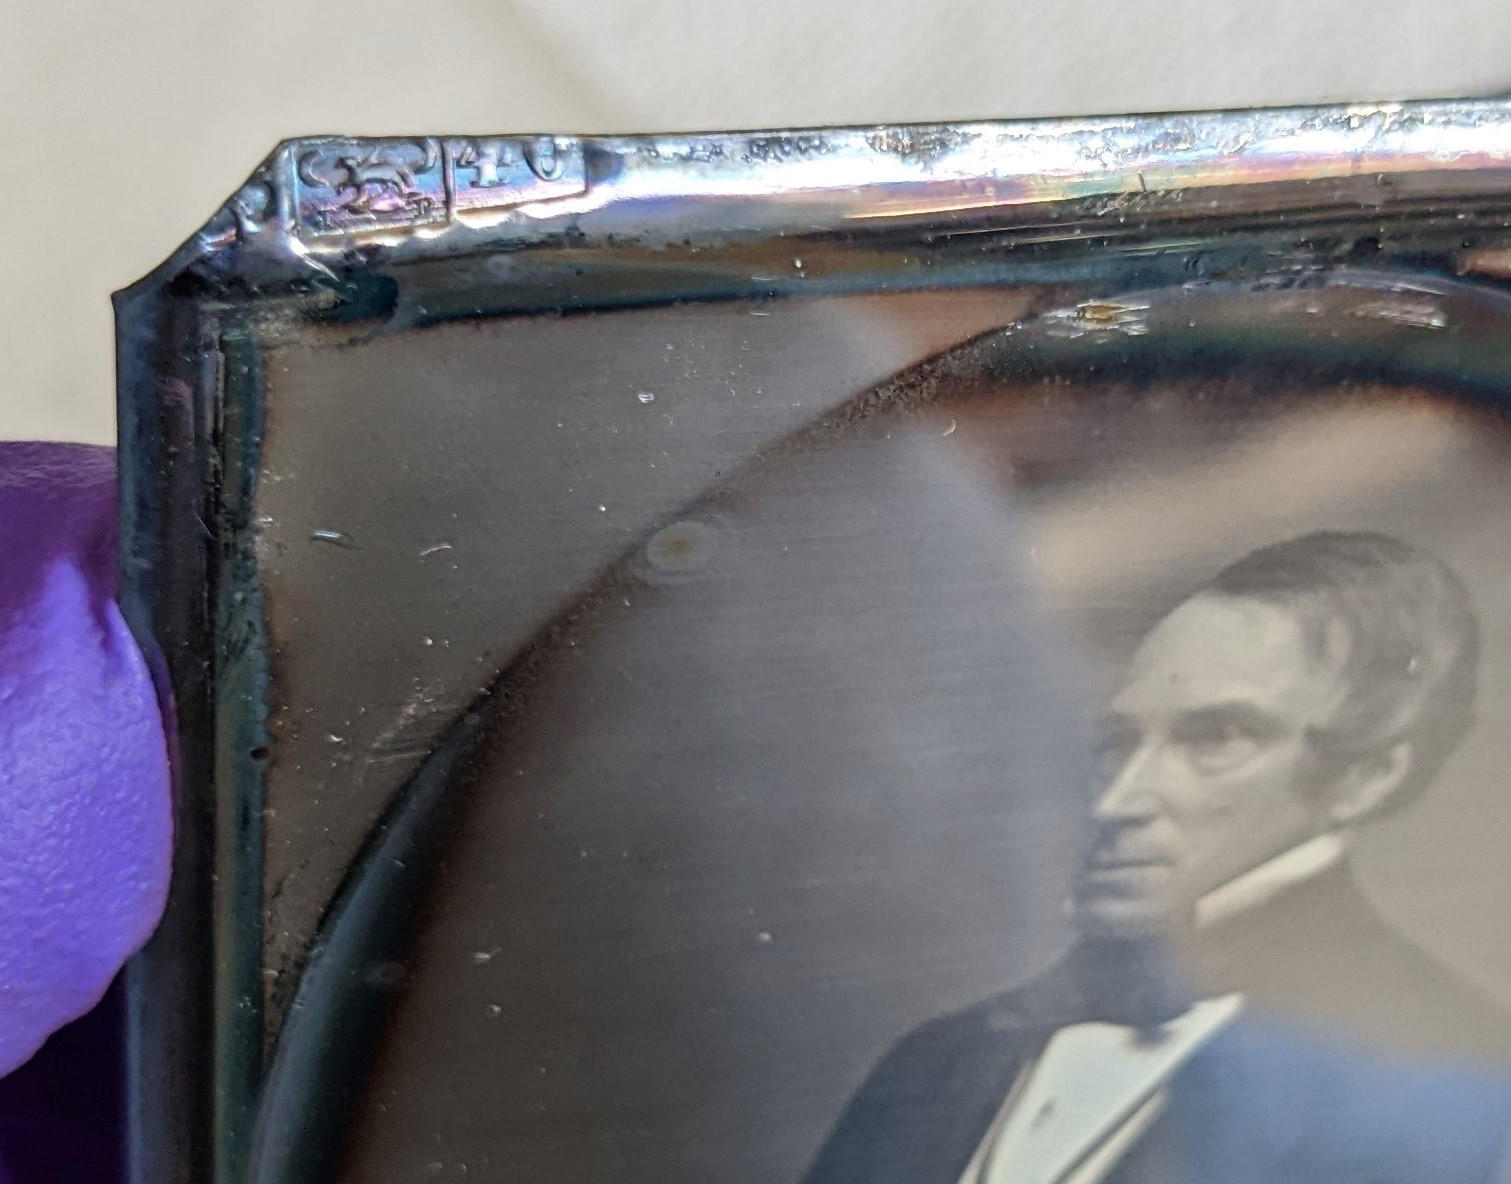 The top left corner of the daguerreotype plate for John L. Gardner, Sr. with the partial hallmark visible.